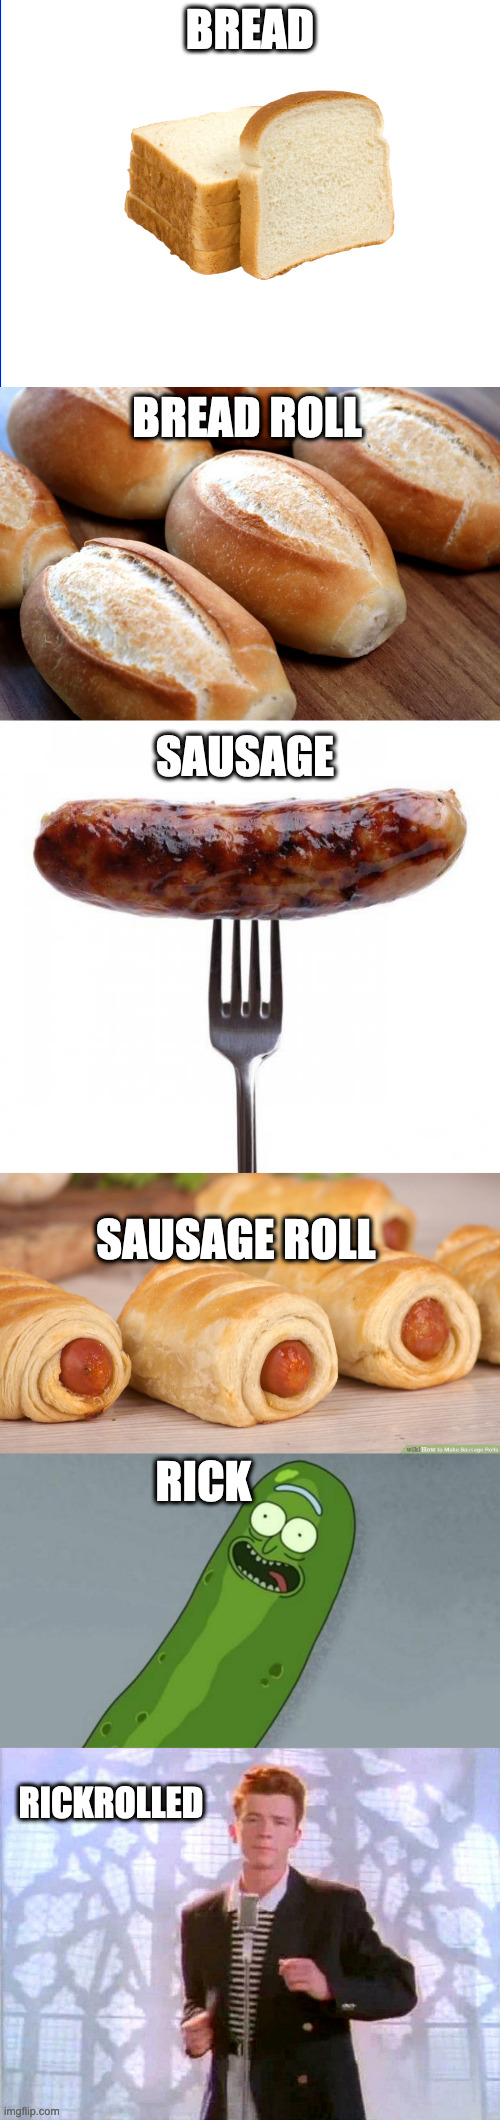 BREAD; BREAD ROLL; SAUSAGE; SAUSAGE ROLL; RICK; RICKROLLED | image tagged in wite screen,pao frances,sausage pls,pickle rick,rickrolling | made w/ Imgflip meme maker